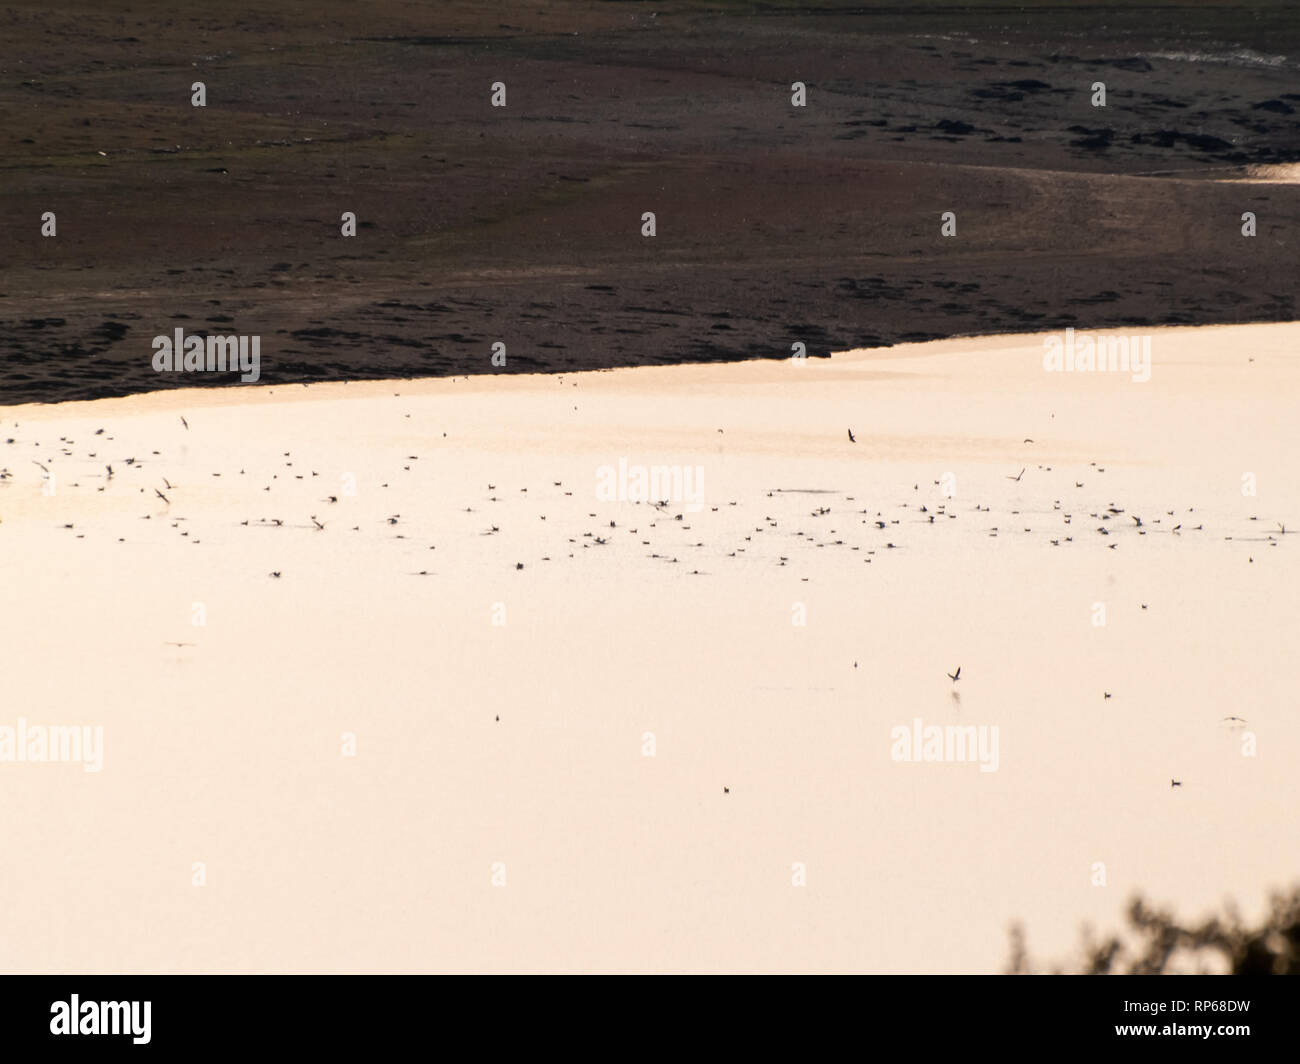 A flock of aquatic birds taking off in a lake at sunset Stock Photo